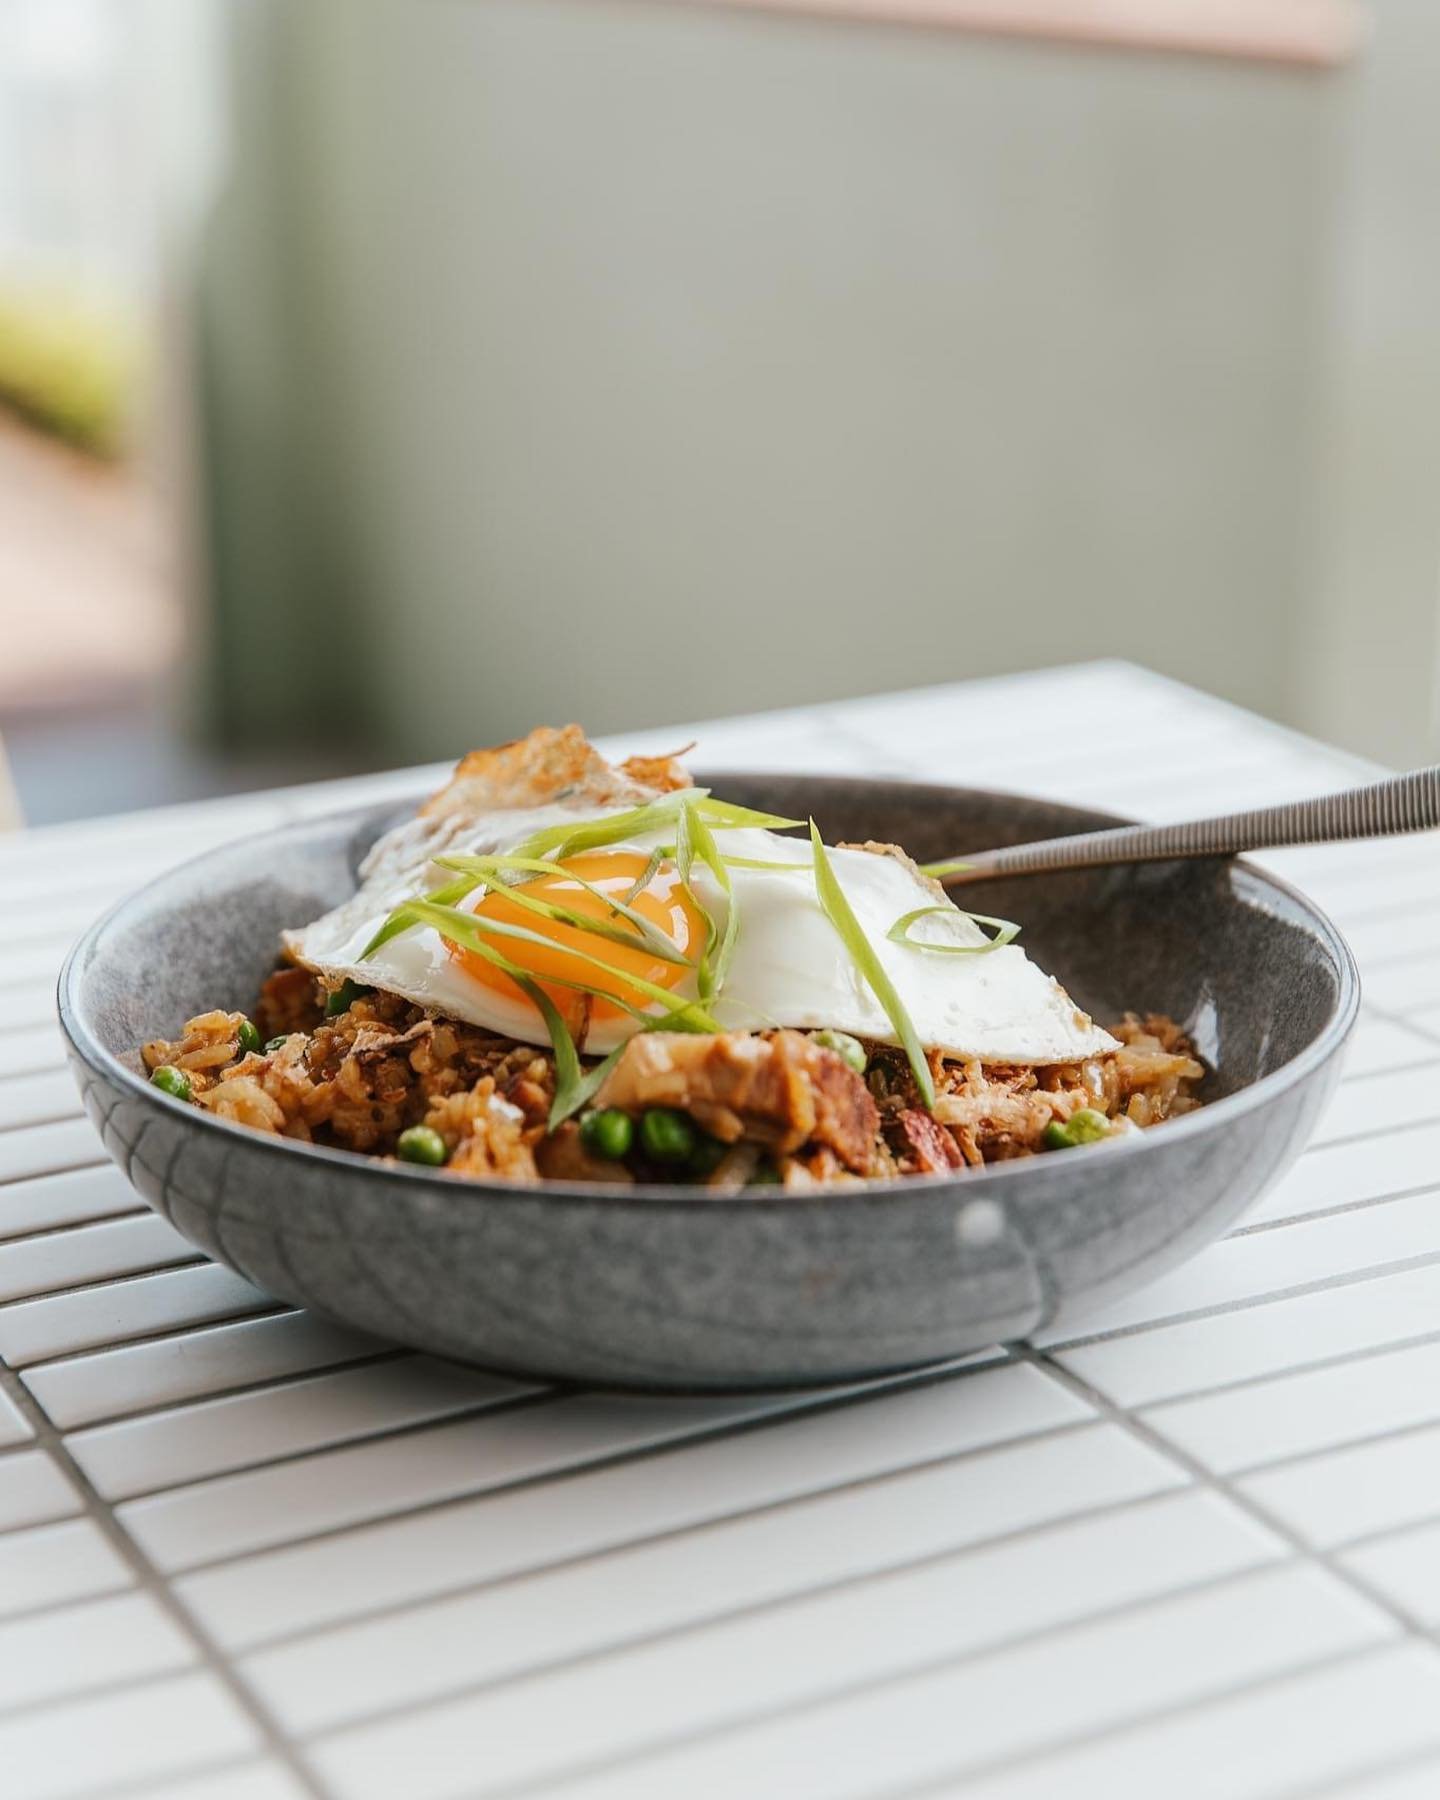 If you haven&rsquo;t already tried our Pork Belly Nasi Goreng, it&rsquo;s a MUST 😍

This one has quickly become a crowd favourite 🫶

Book here 👉 www.christiesbeachhotel.com.au